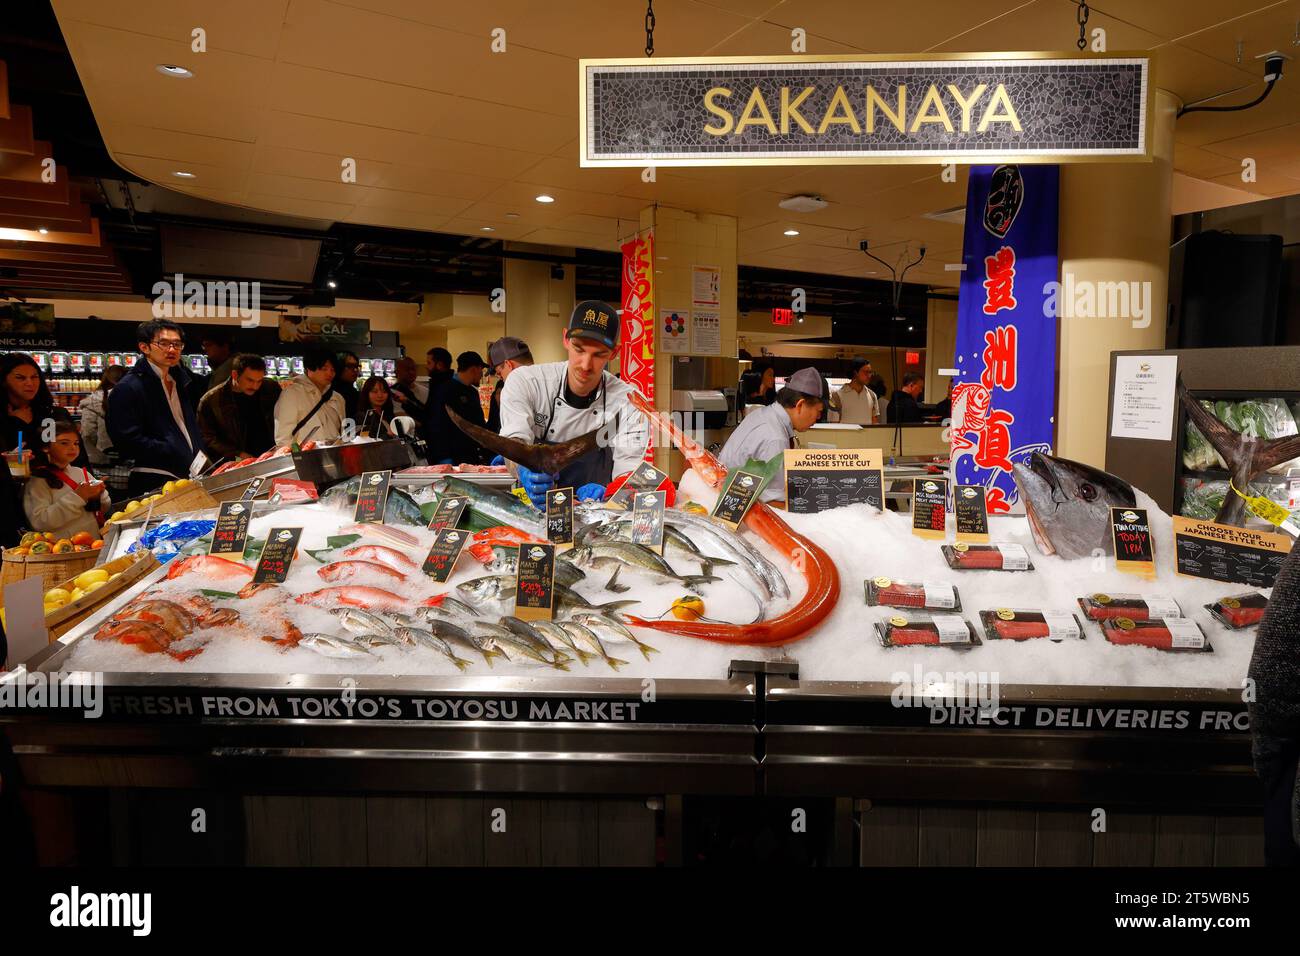 05 November 2023, New York. A fishmonger inserts a bluefin tuna tail into a display of fresh fish and seafood at the Sakanaya fish market inside Wegmans Astor Place. The fish counter features domestic fresh fish and seafood, and fish imported from Tokyo's Toyosu Fish Market. Stock Photo